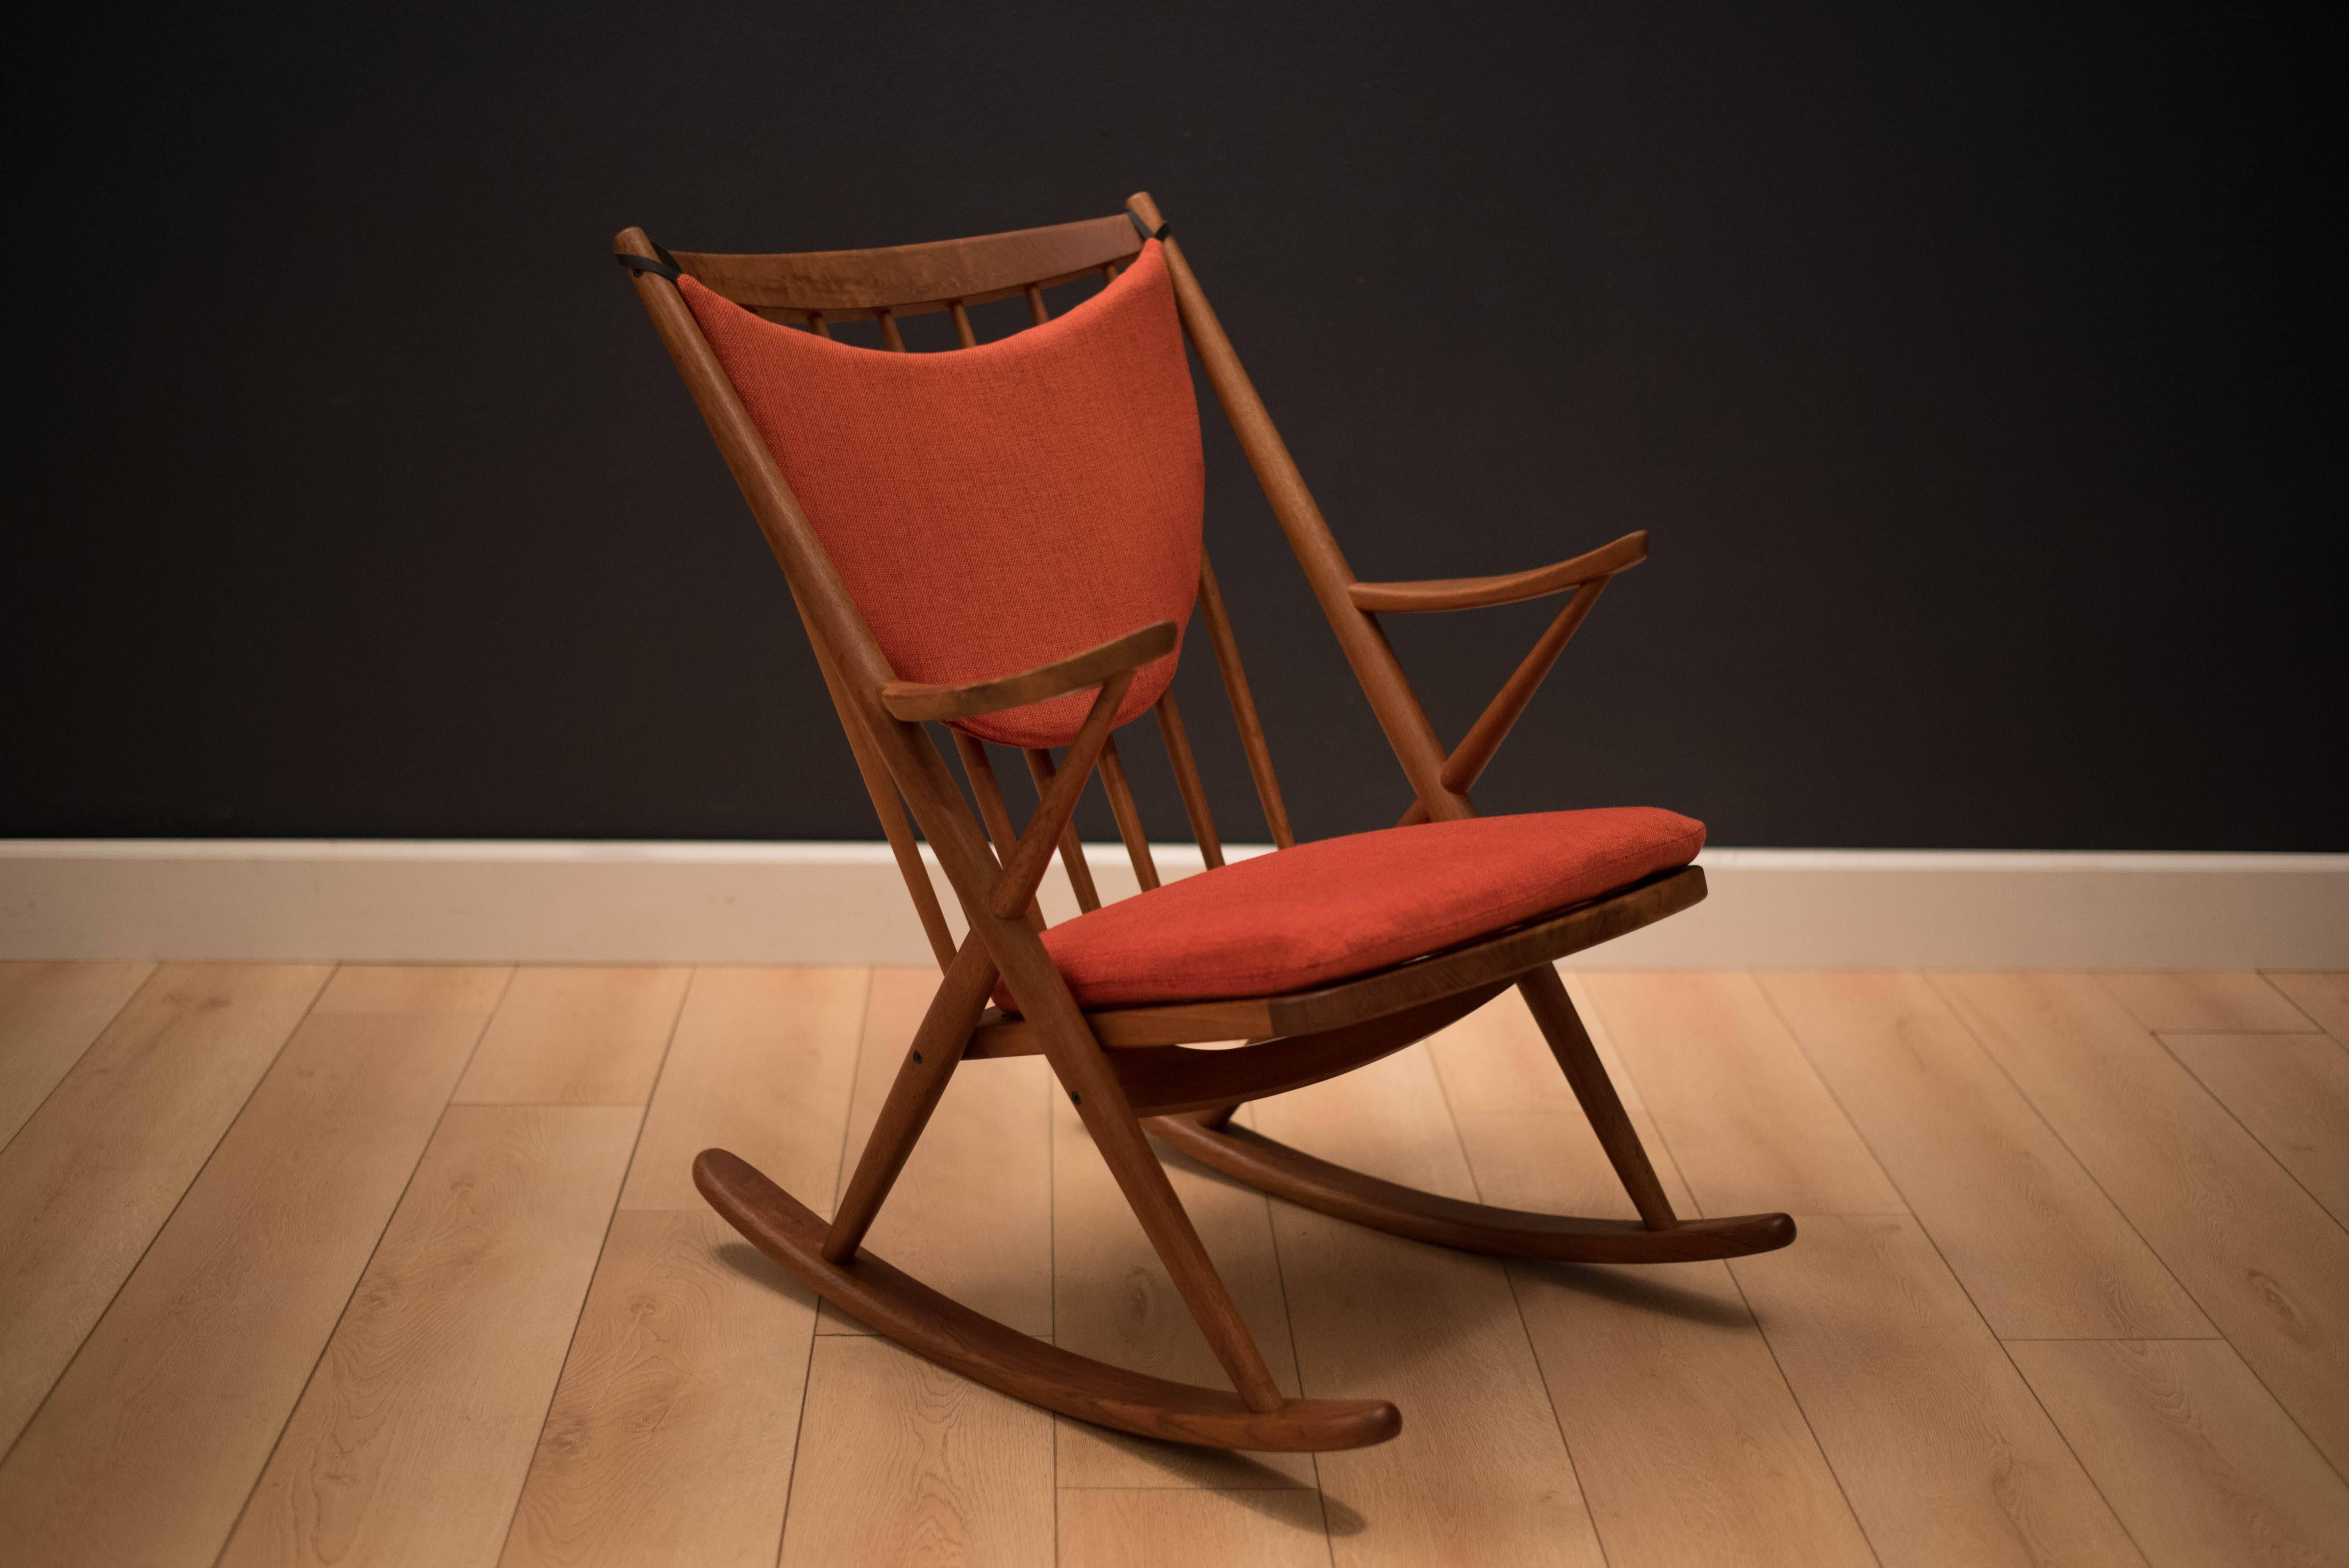 Mid-Century Danish teak rocker by Frank Reenskaug for Bramin. This piece was built with a solid teak frame and includes original fabric in red/orange tweed. Displays well from any angle.
      
     